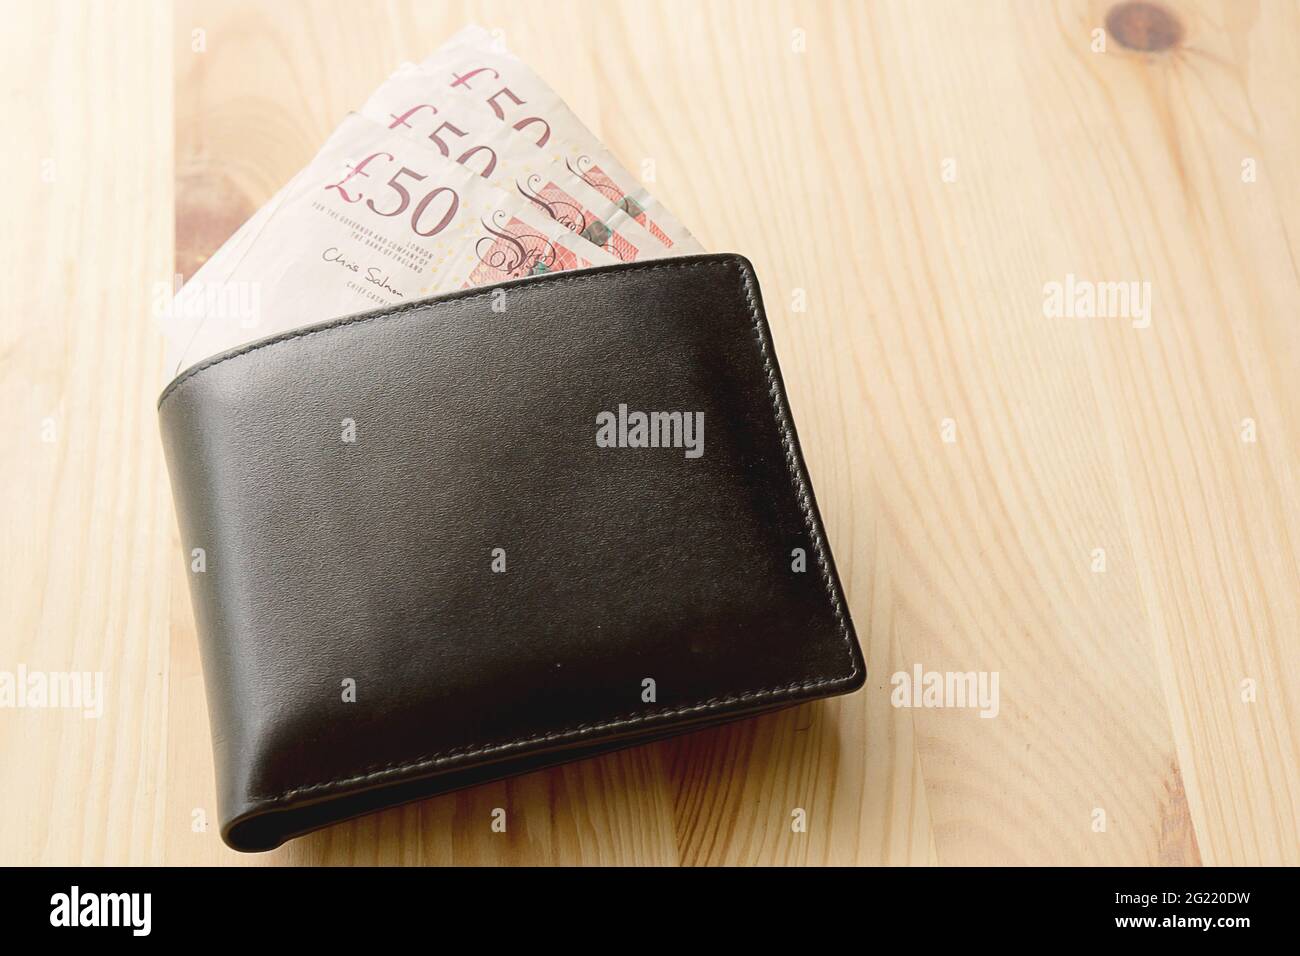 High Angle View Of Modern Black leather Men's Wallet With Pound Cash On The Old Rough Wood Textured Background With Copy Space Stock Photo